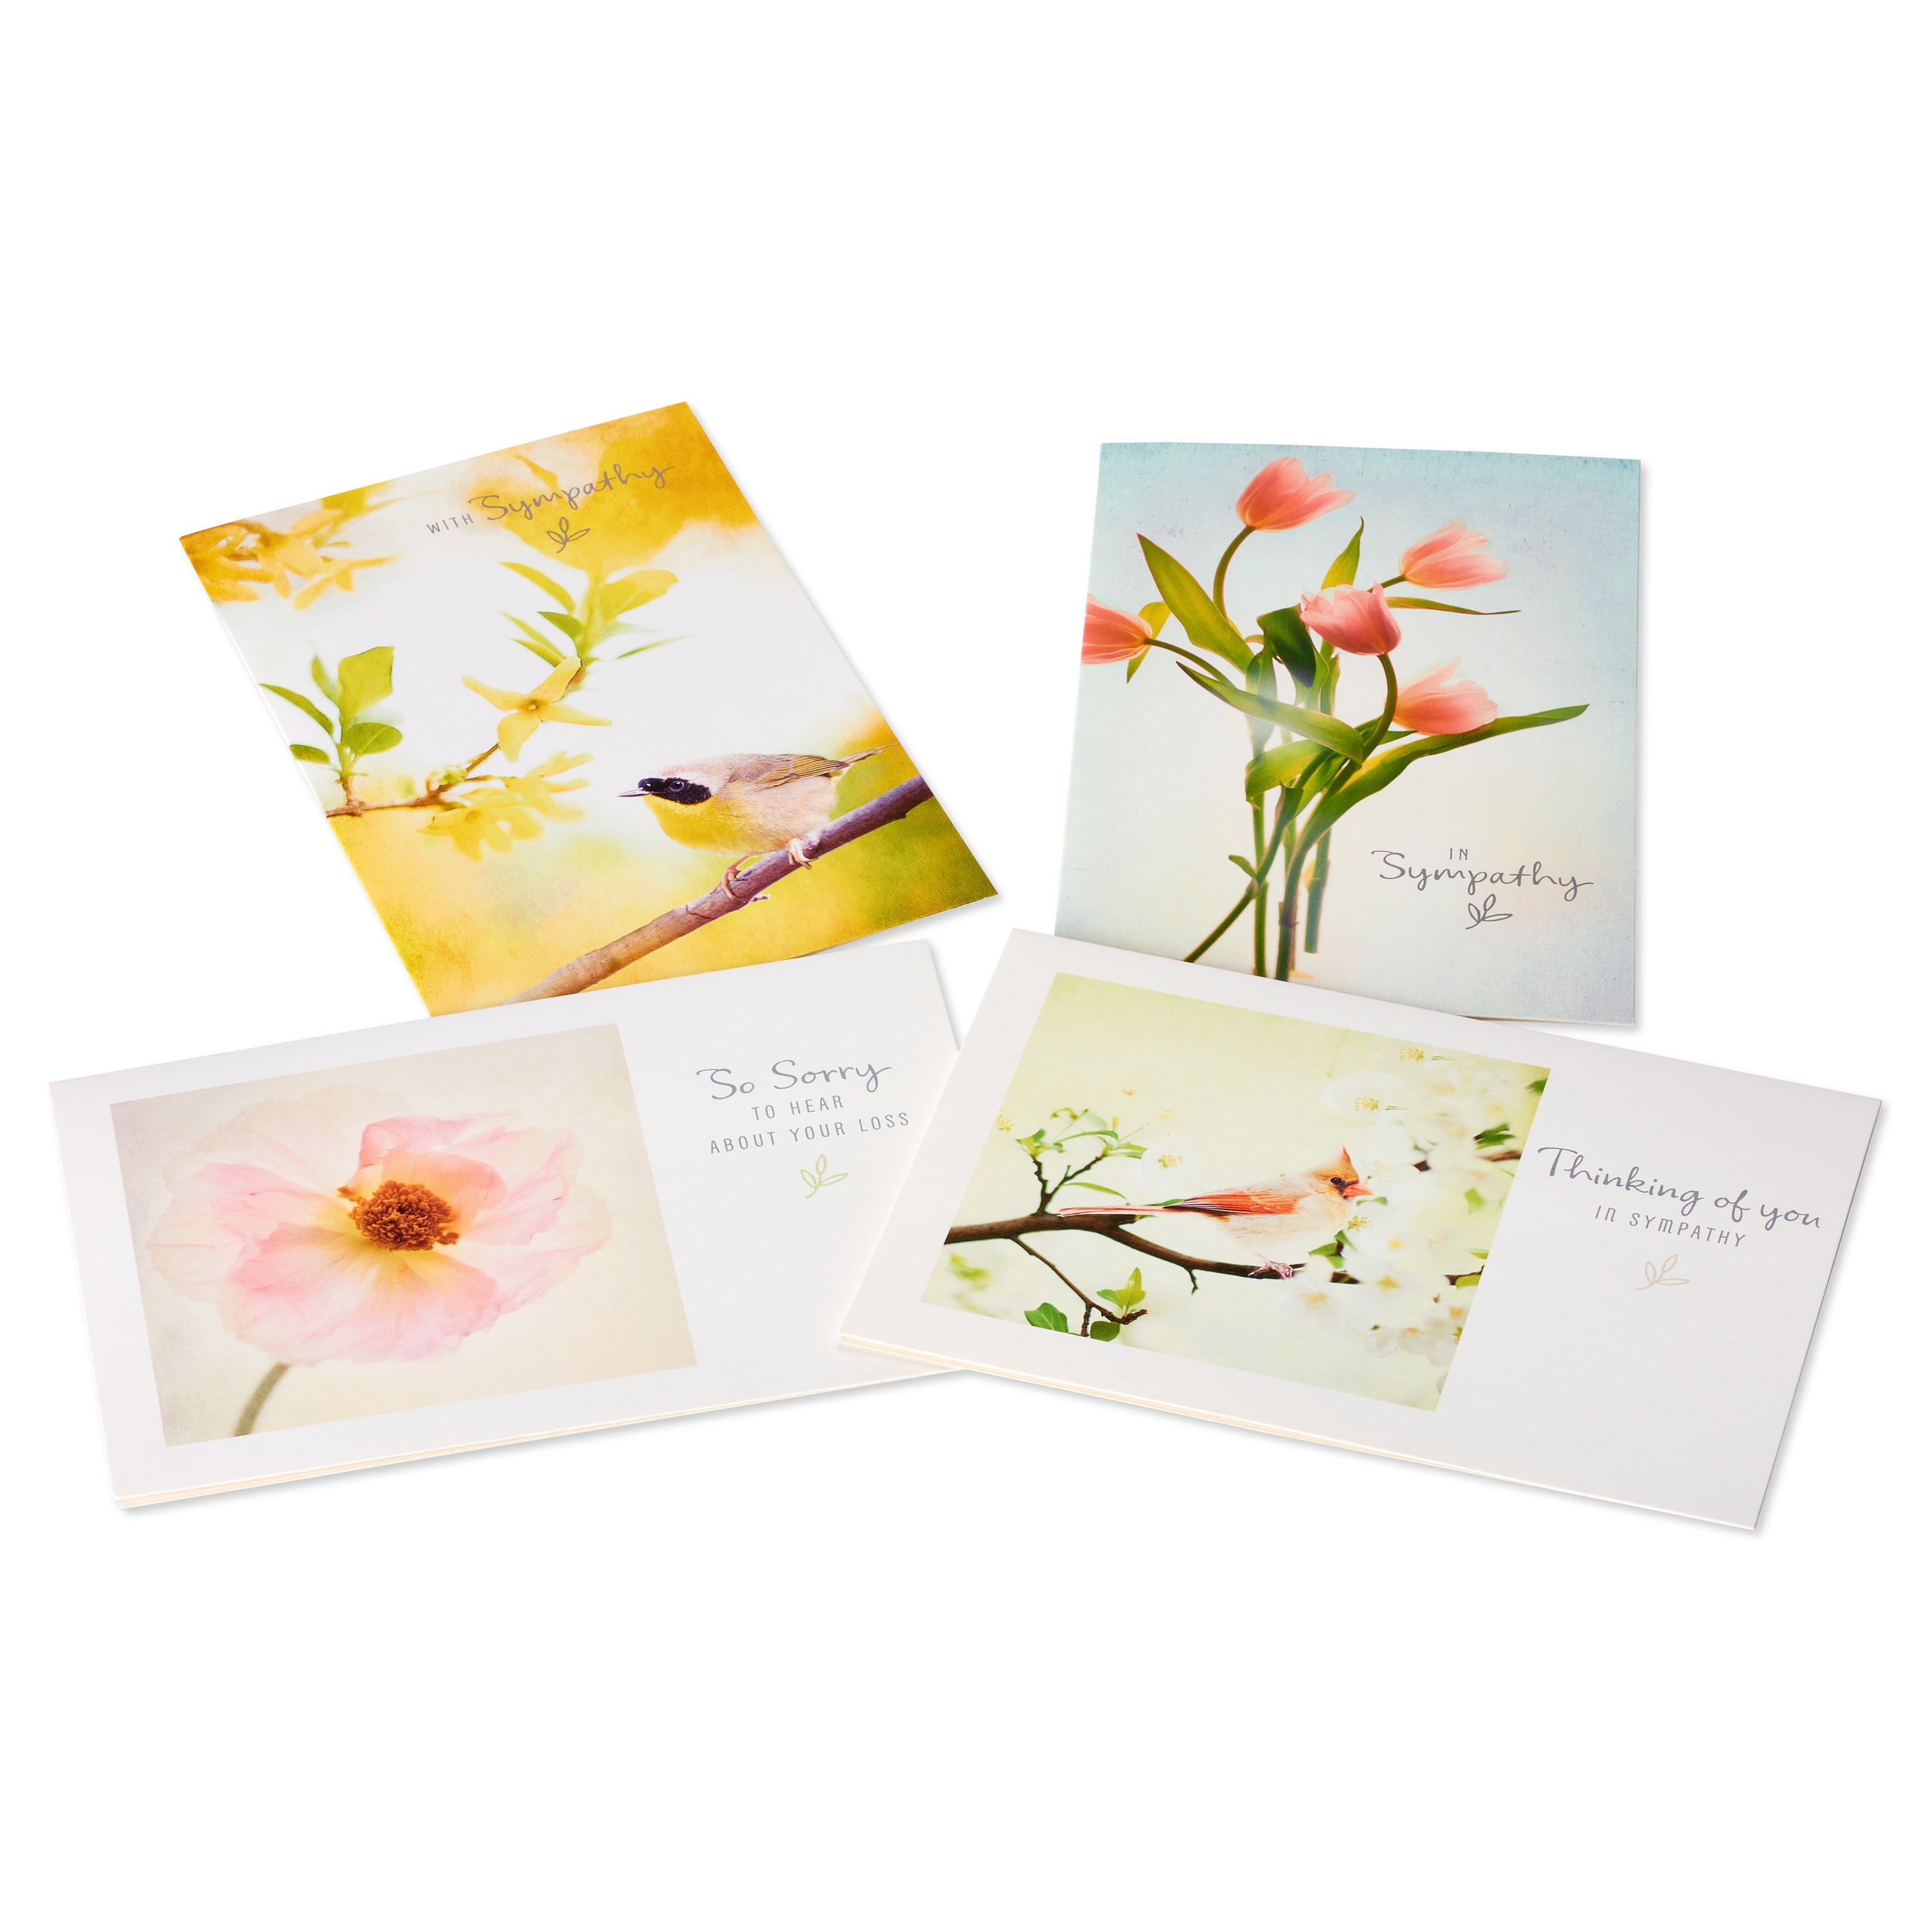 4 Designs, 3 Ea Peaceful Petals MQ4611SMG-B3x4 Details about   12 Assorted Sympathy Cards 